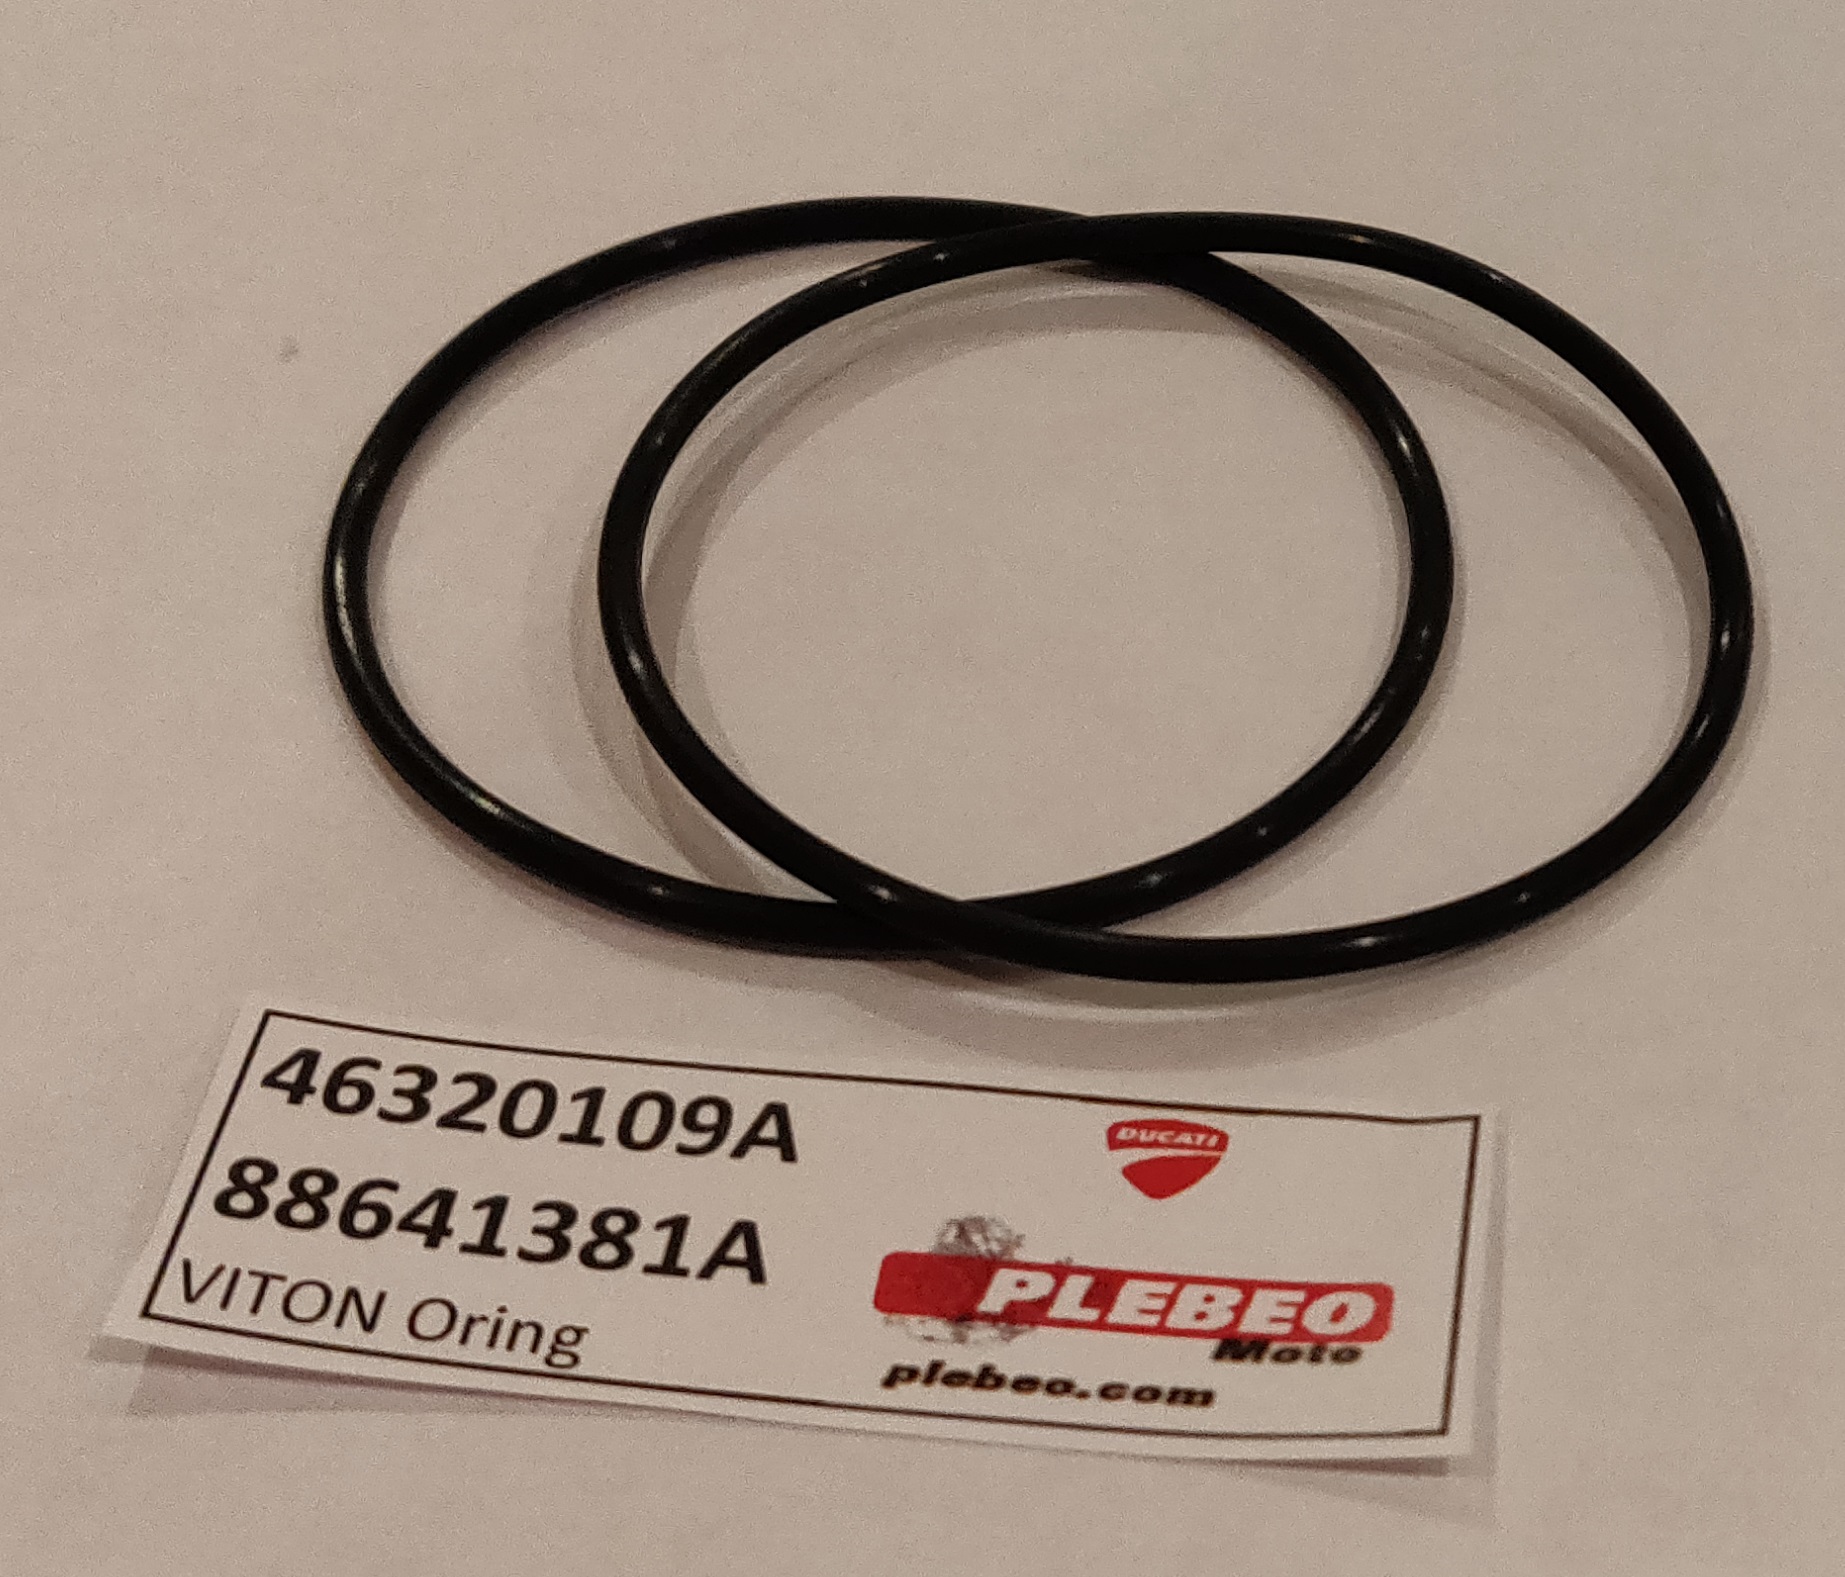 Ducati Cylinder O-Ring 2x kit HM MS Monster SC 46320109A 88641381A